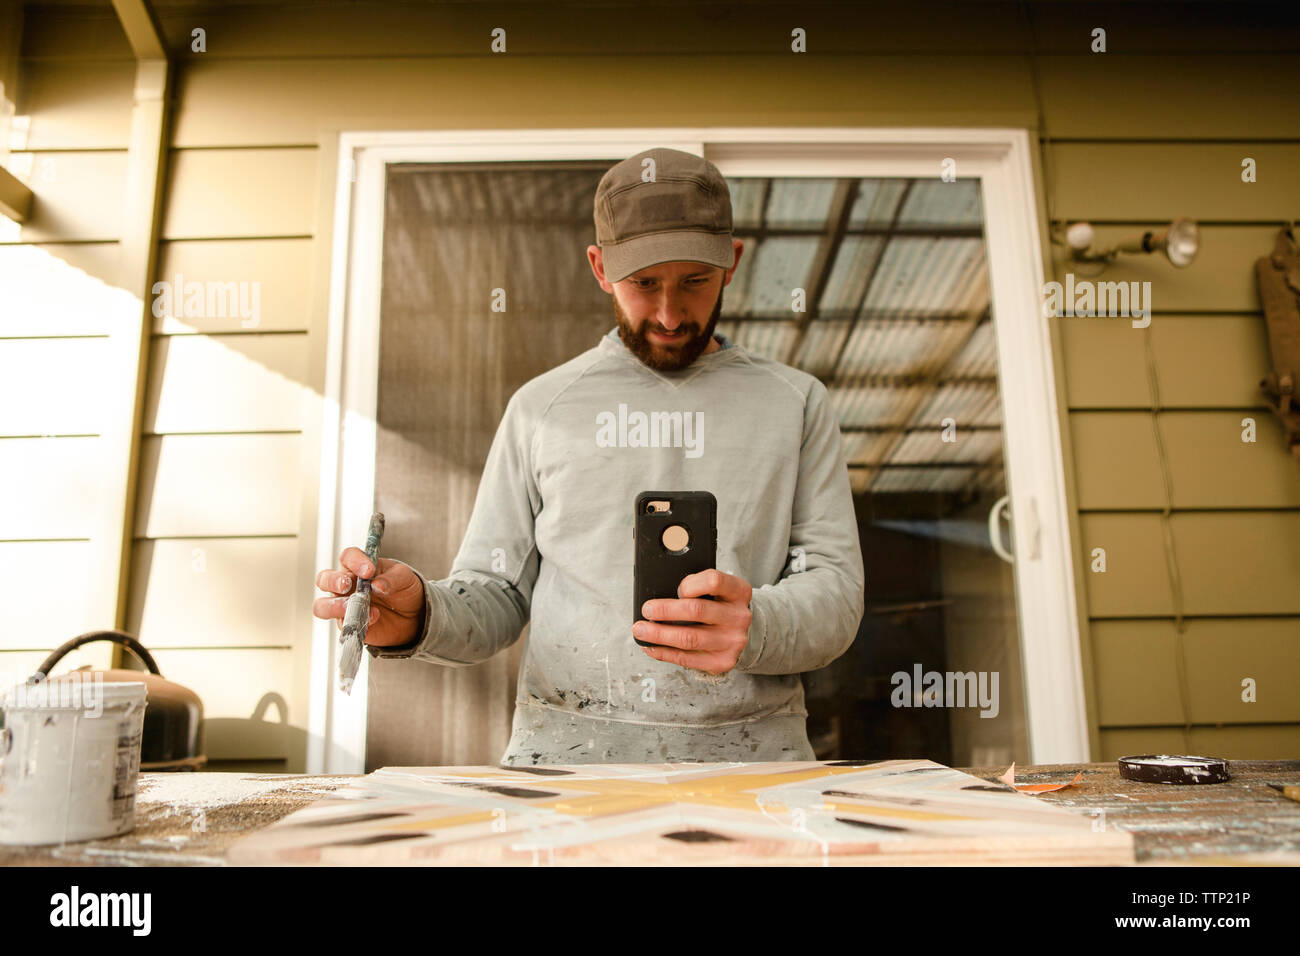 Confident artist photographing wooden art through mobile phone at workbench Stock Photo